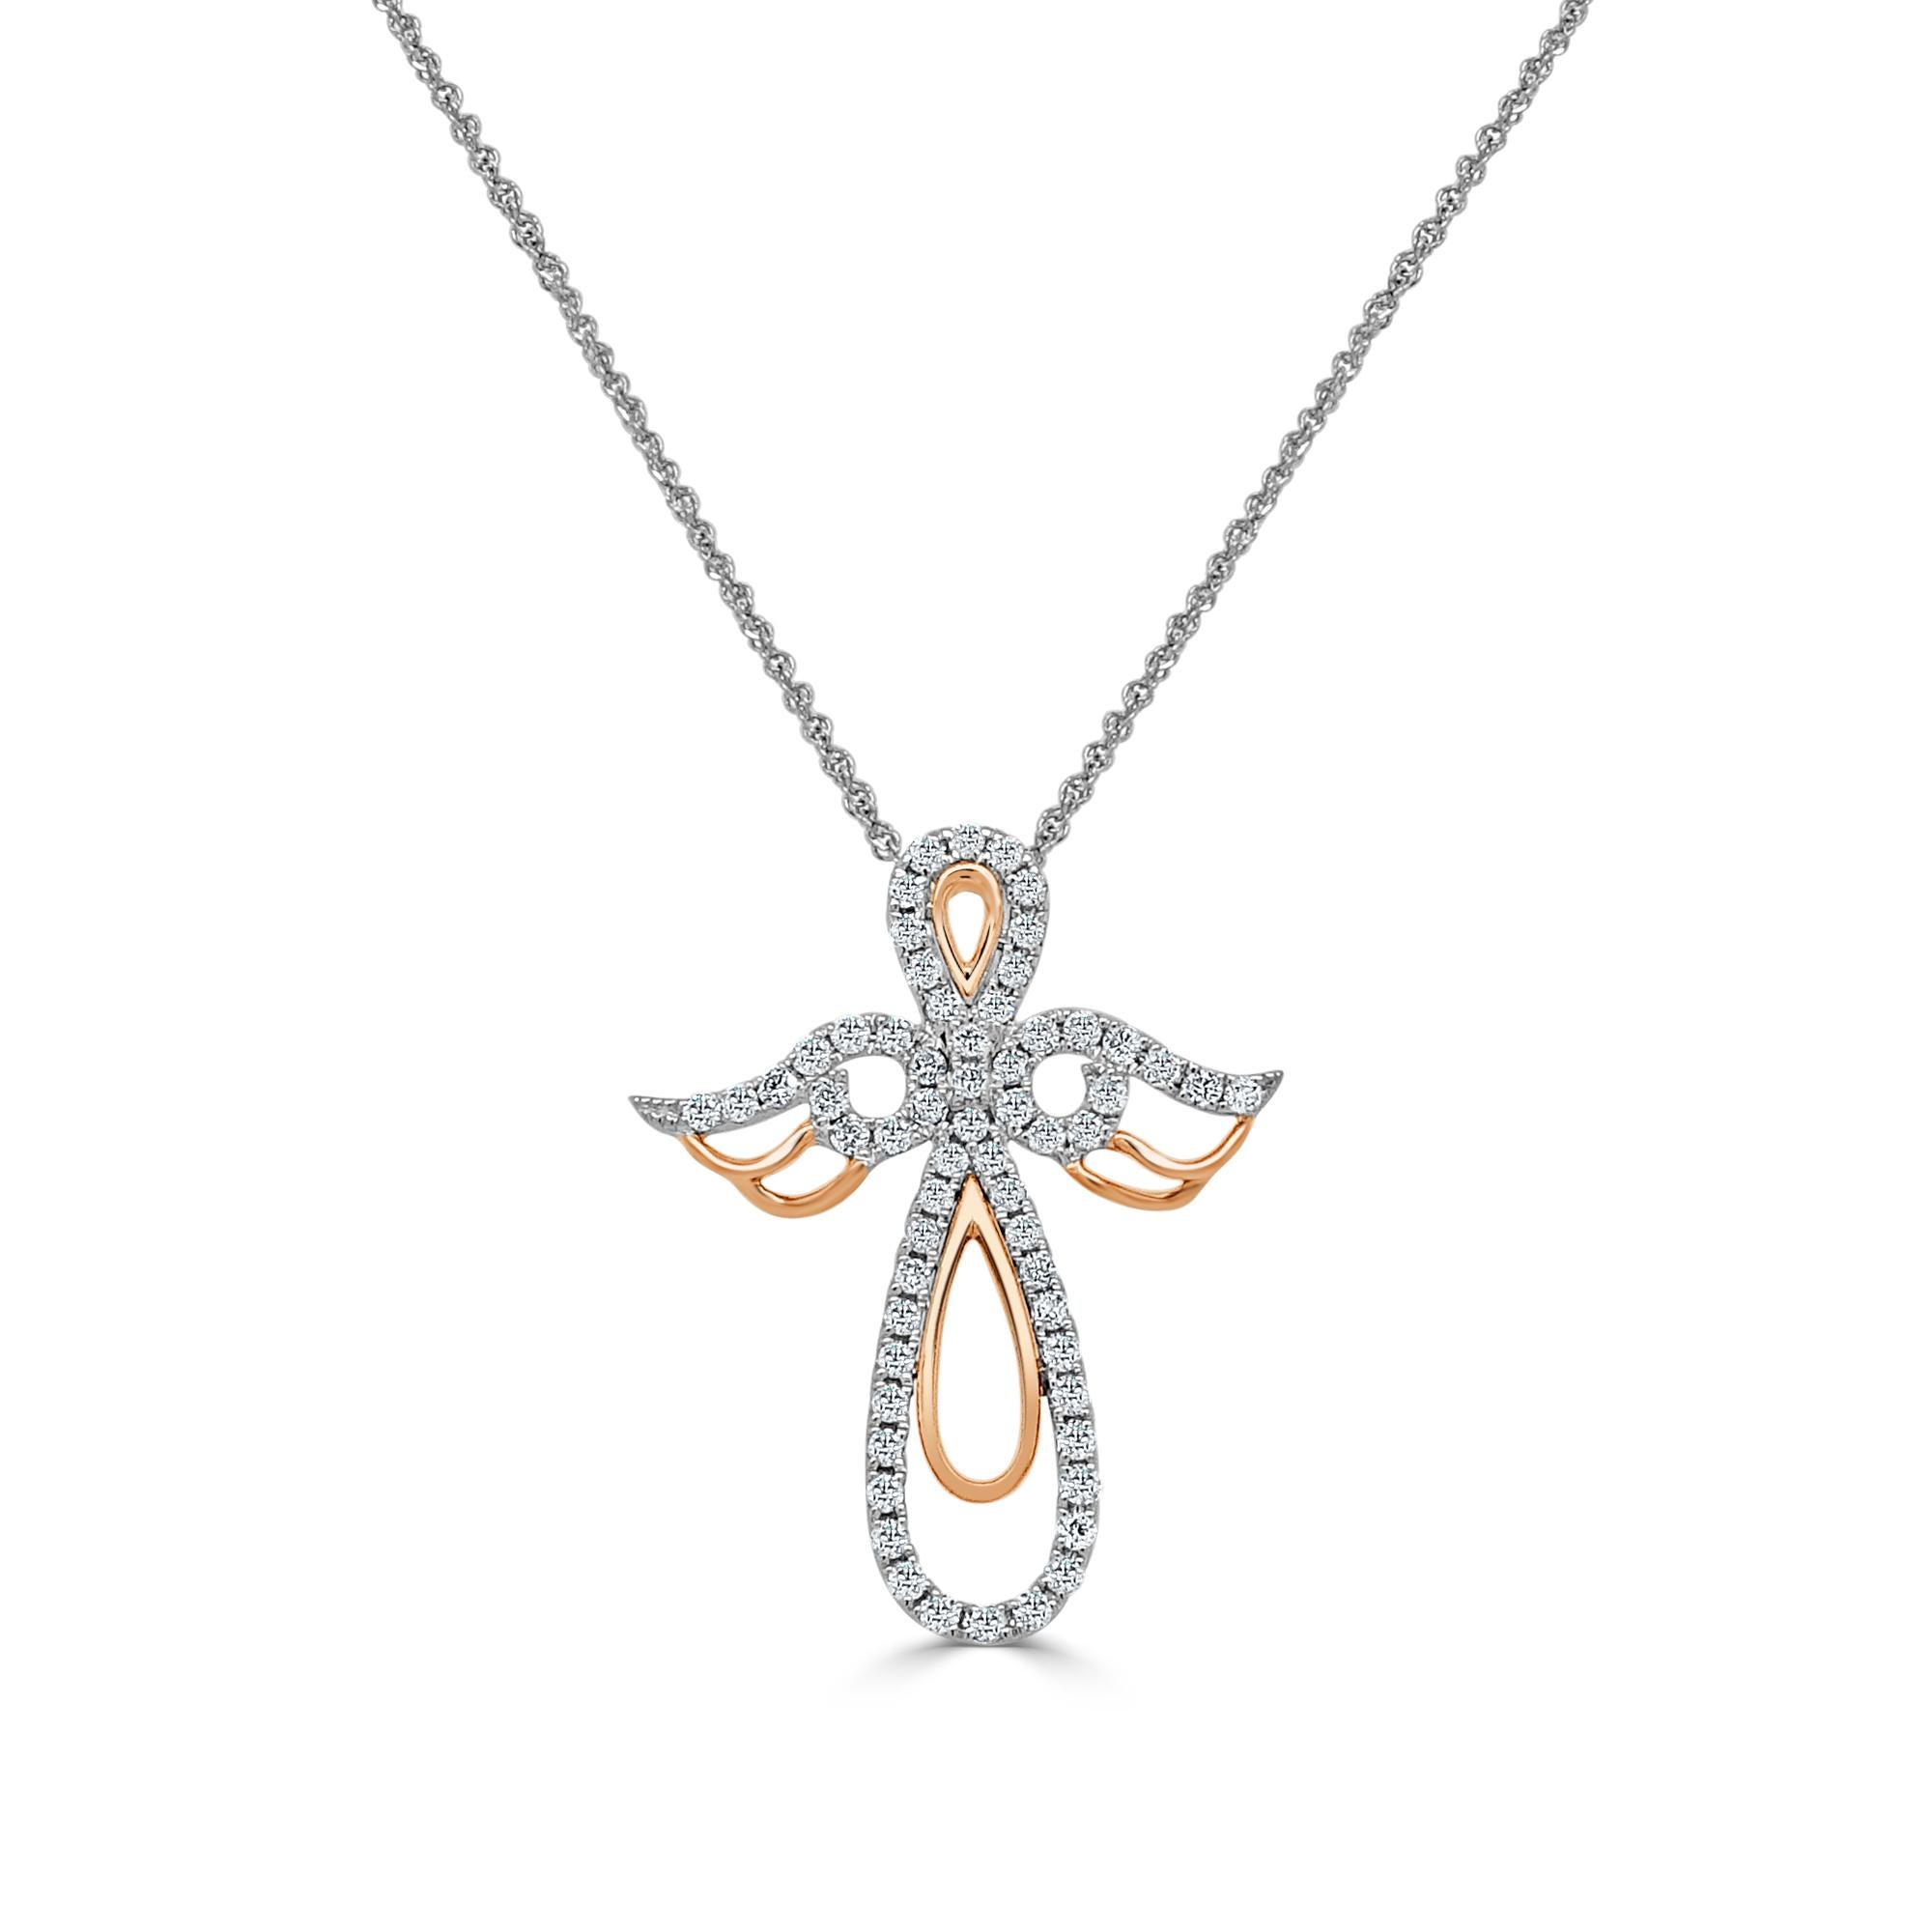 Guardian Angel pendant necklace, with open wings, made of 18K rose white gold with round diamonds. Let the stunning natural beauty of diamonds balance your emotions and calm your soul.

Gold Purity: 18 Karat
Gold Type: Rose White Gold
Stone Name: